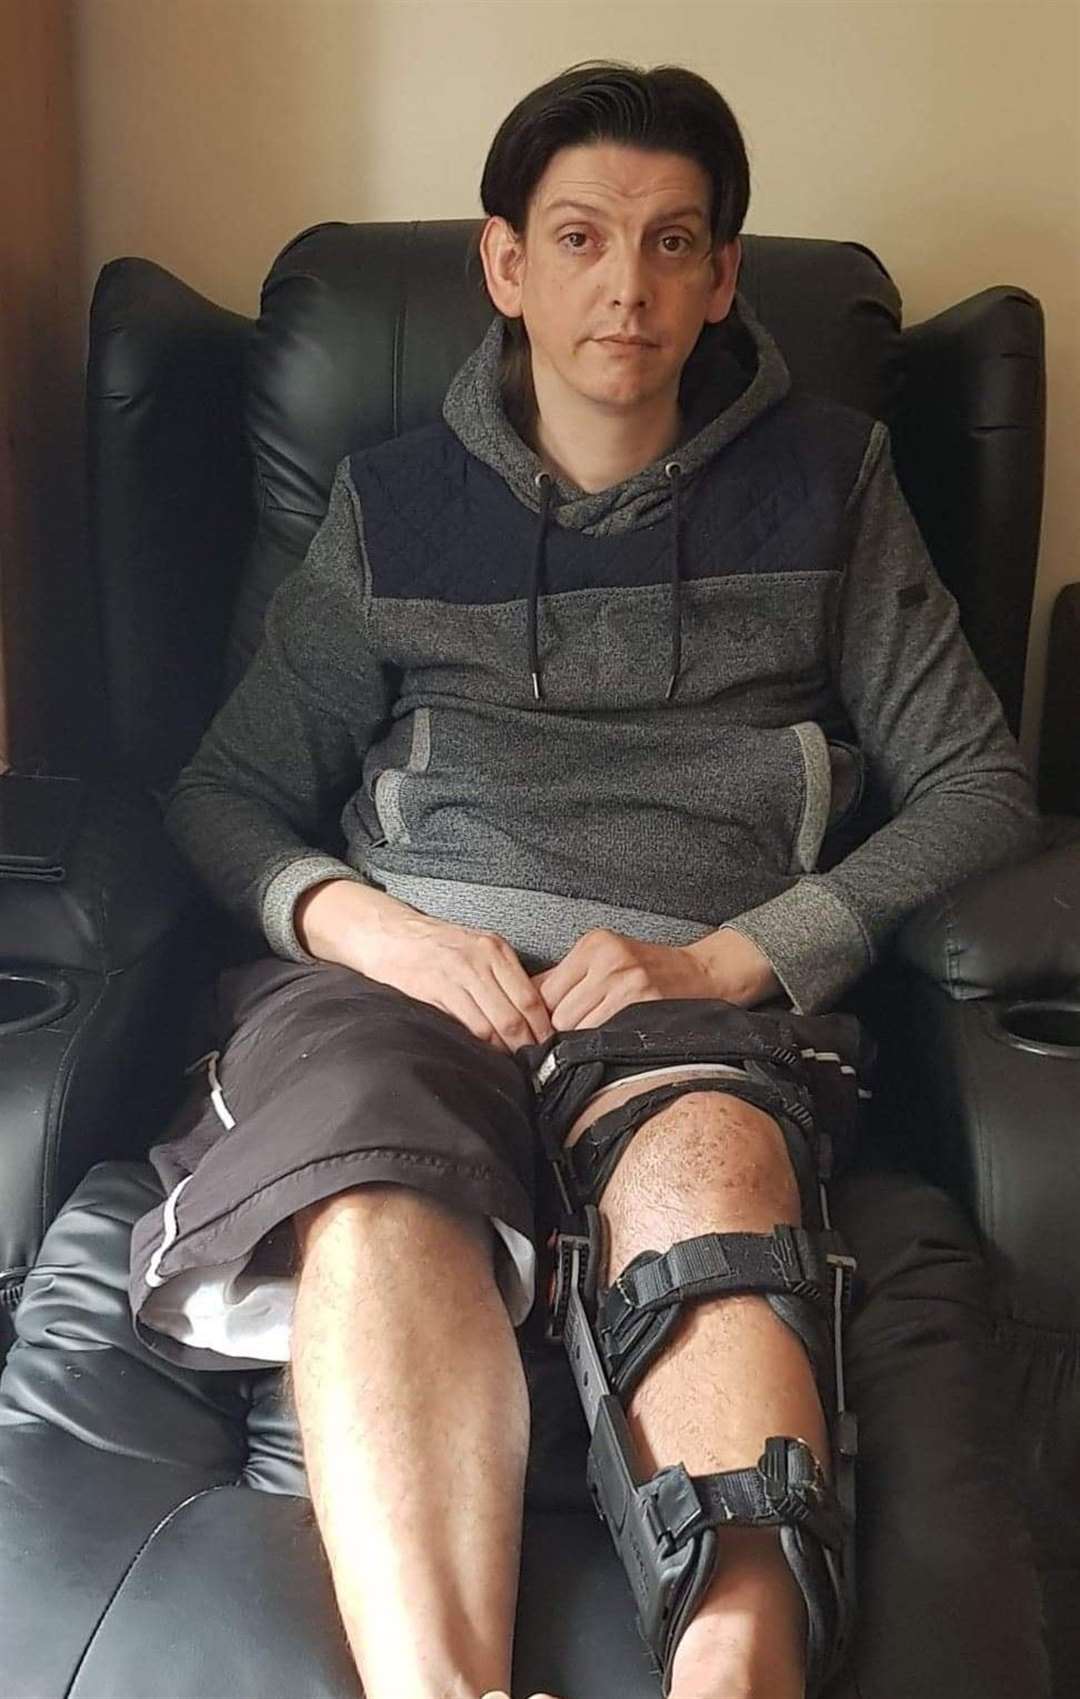 Daniel Boughton says he's been waiting 13 months for surgery to save his leg after a motorbike accident in August 2019